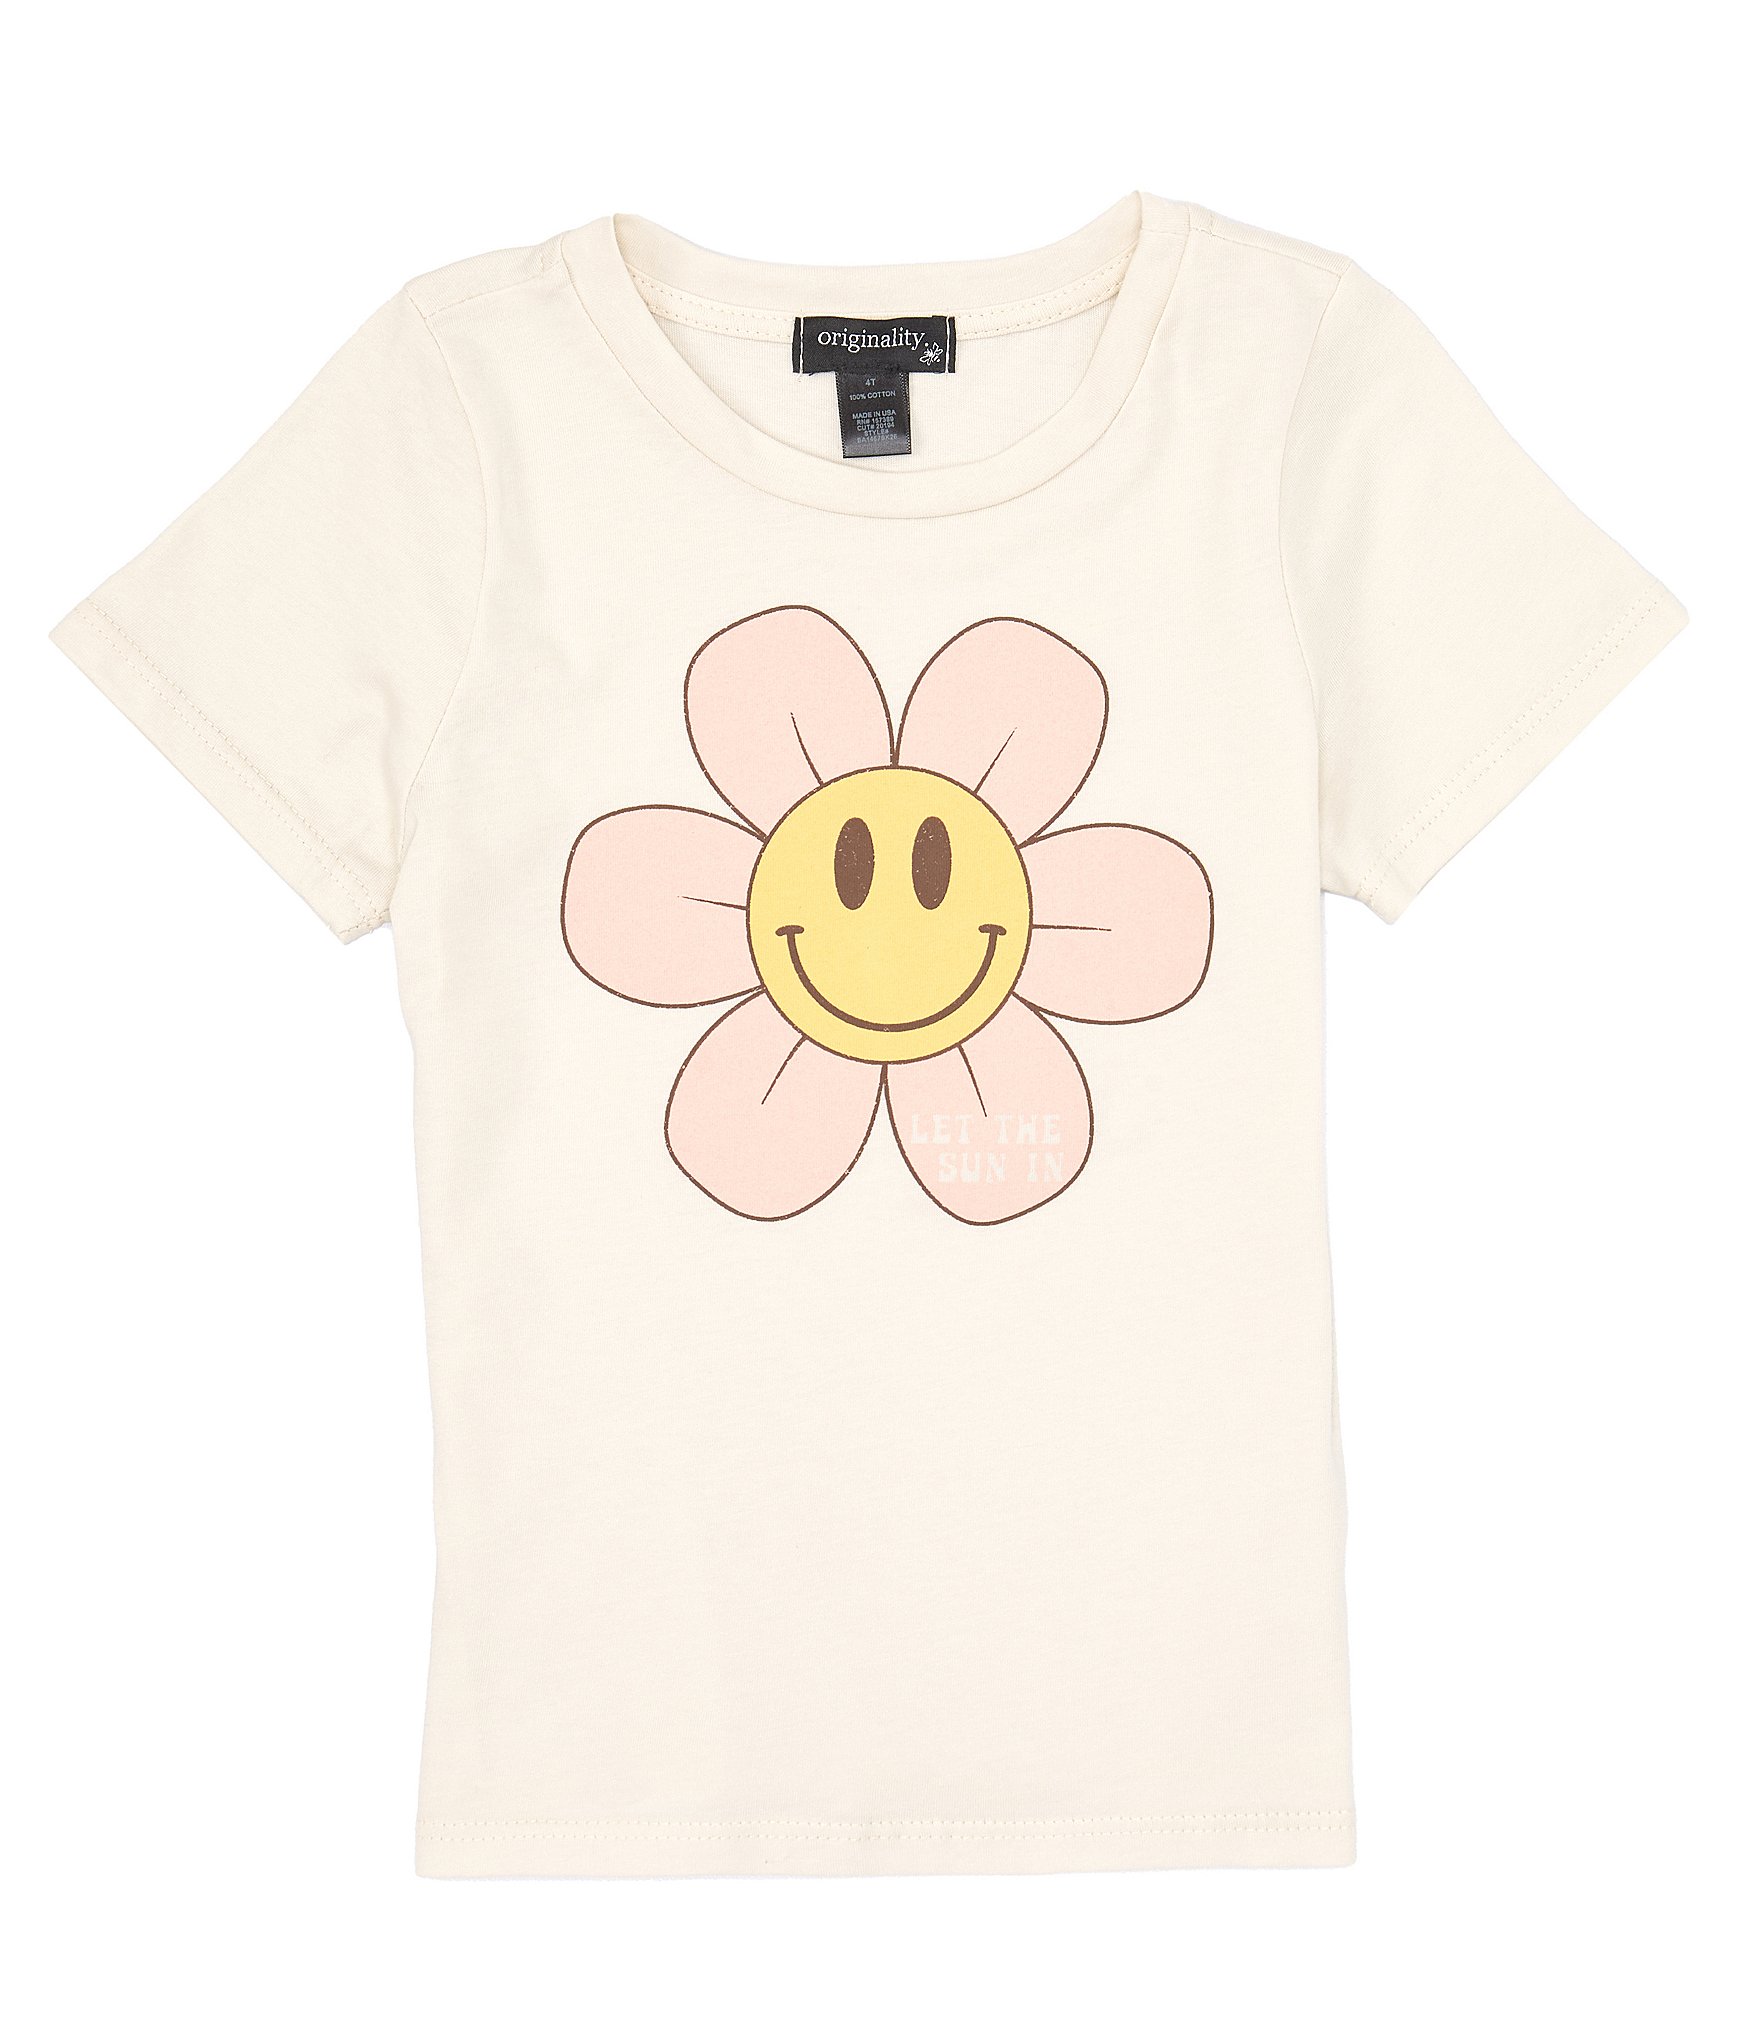 Originality Little Girls 2T-6X Short-Sleeve Daisy Smiley Face Graphic ...